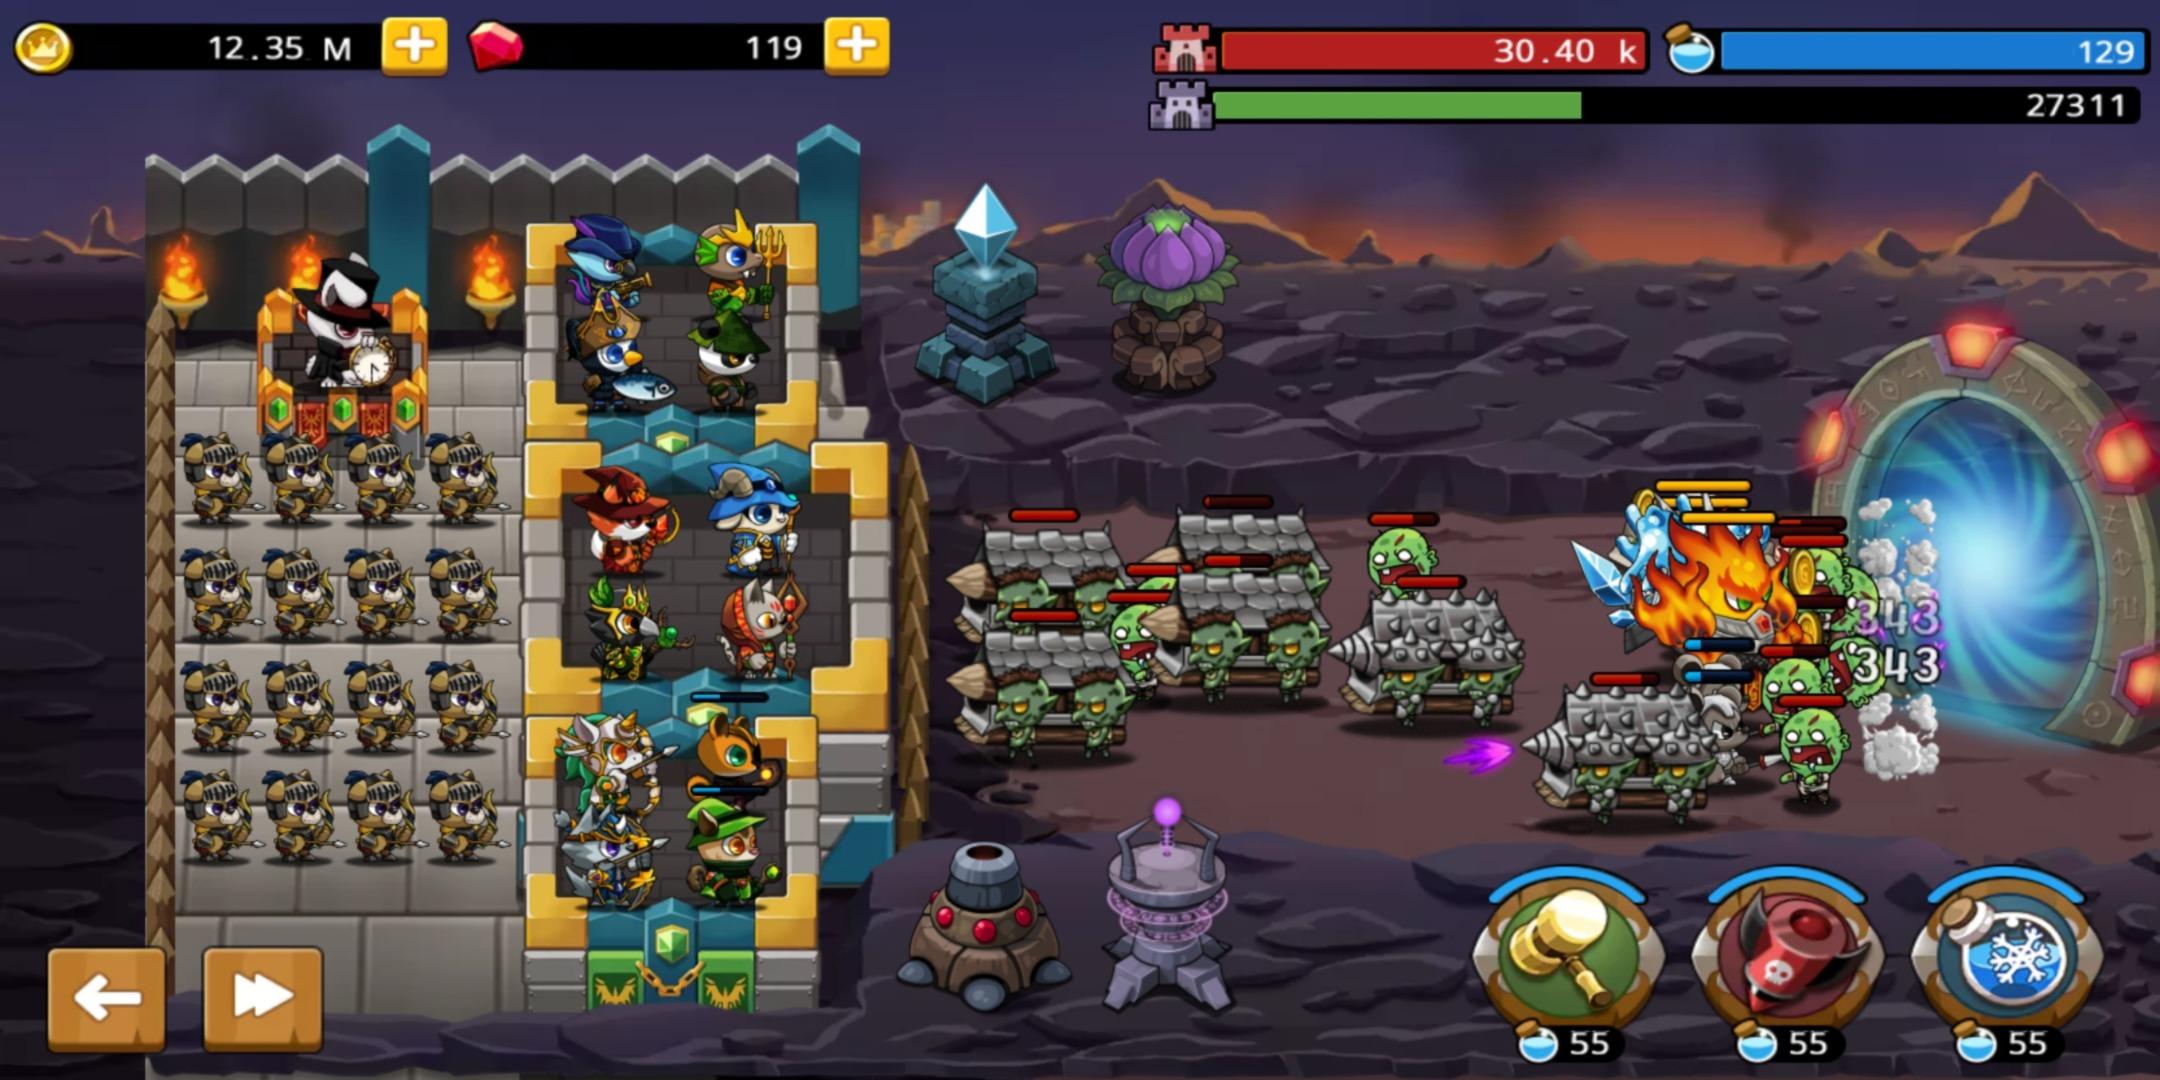 Download and Play Dice Kingdom - Tower Defense Game on PC & Mac (Emulator)